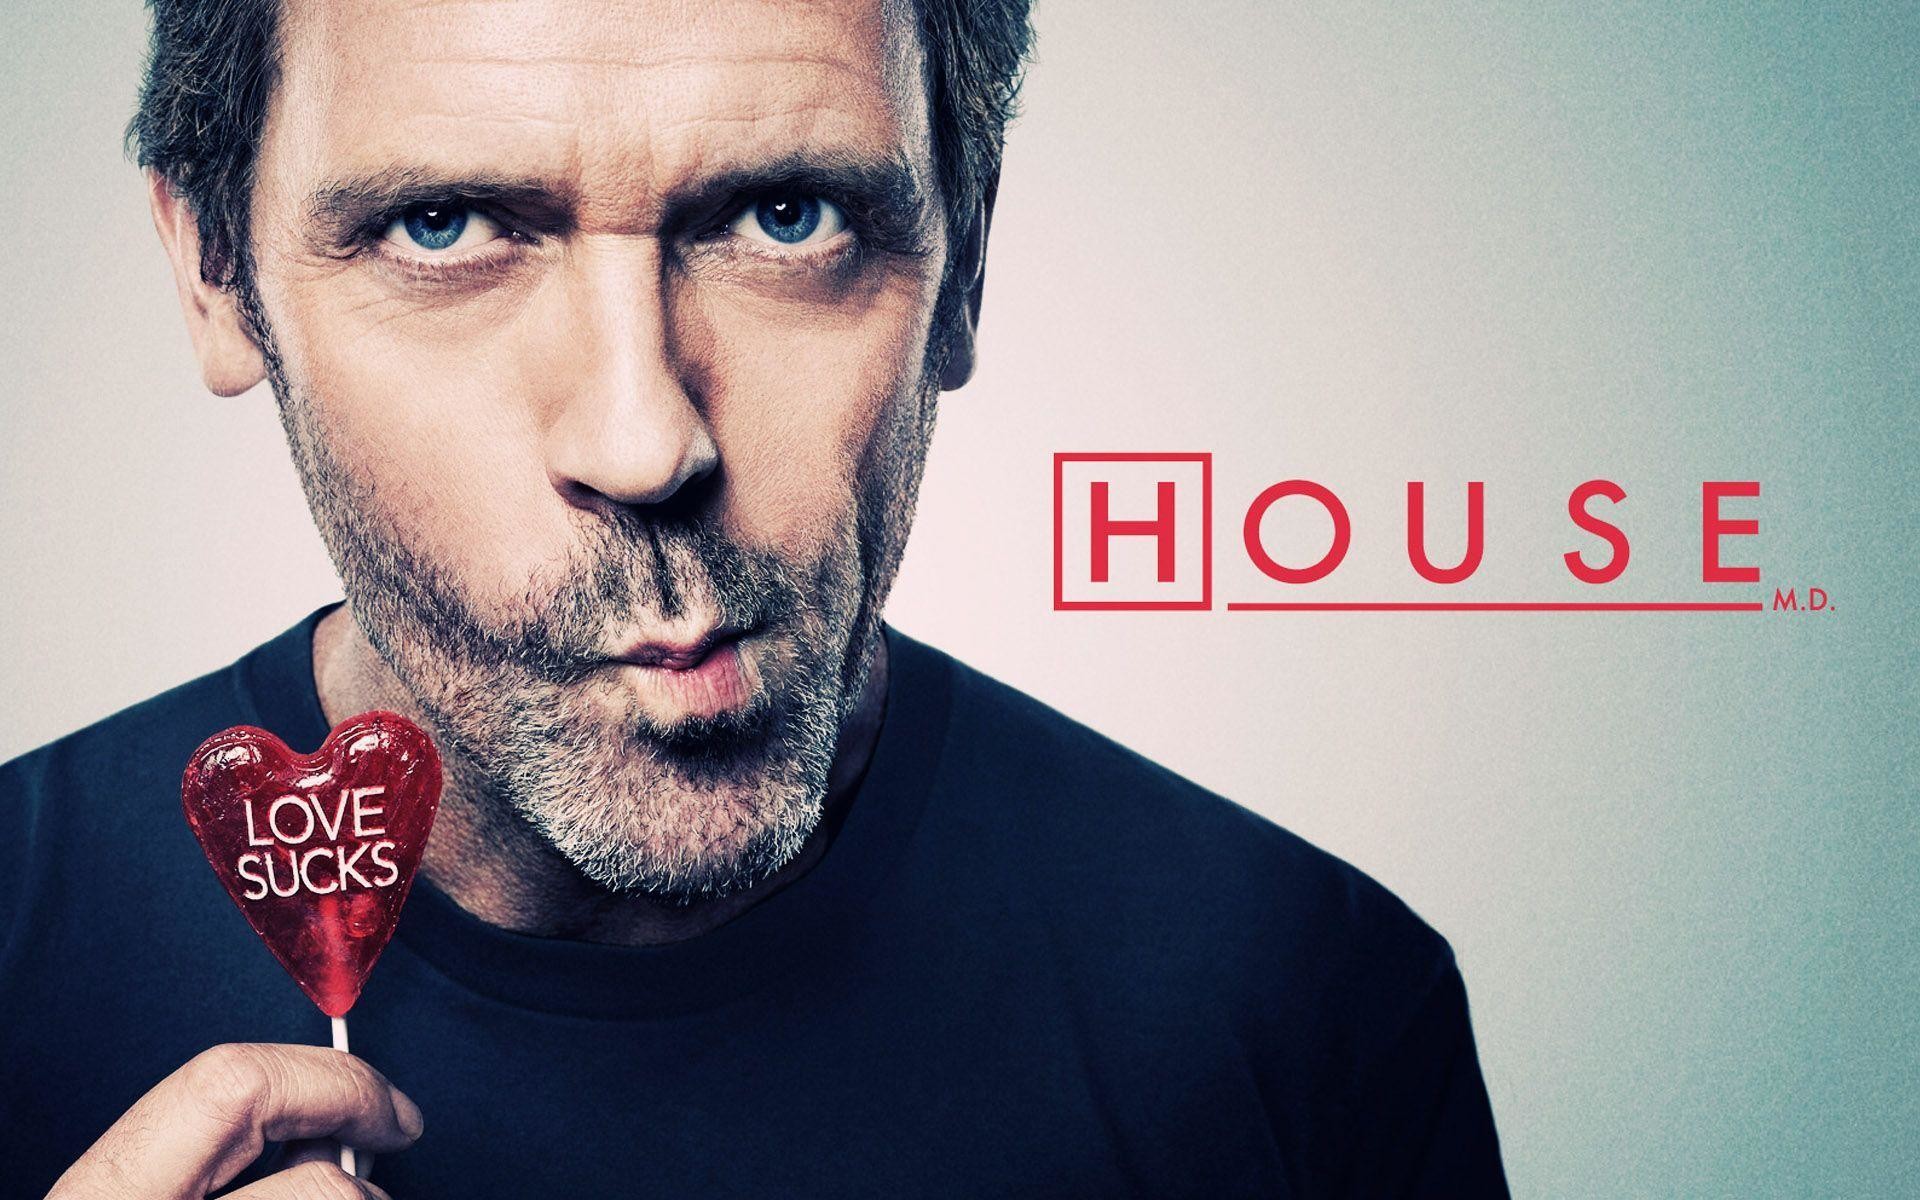 1920x1200 House Md Wallpapers - Full HD wallpaper search